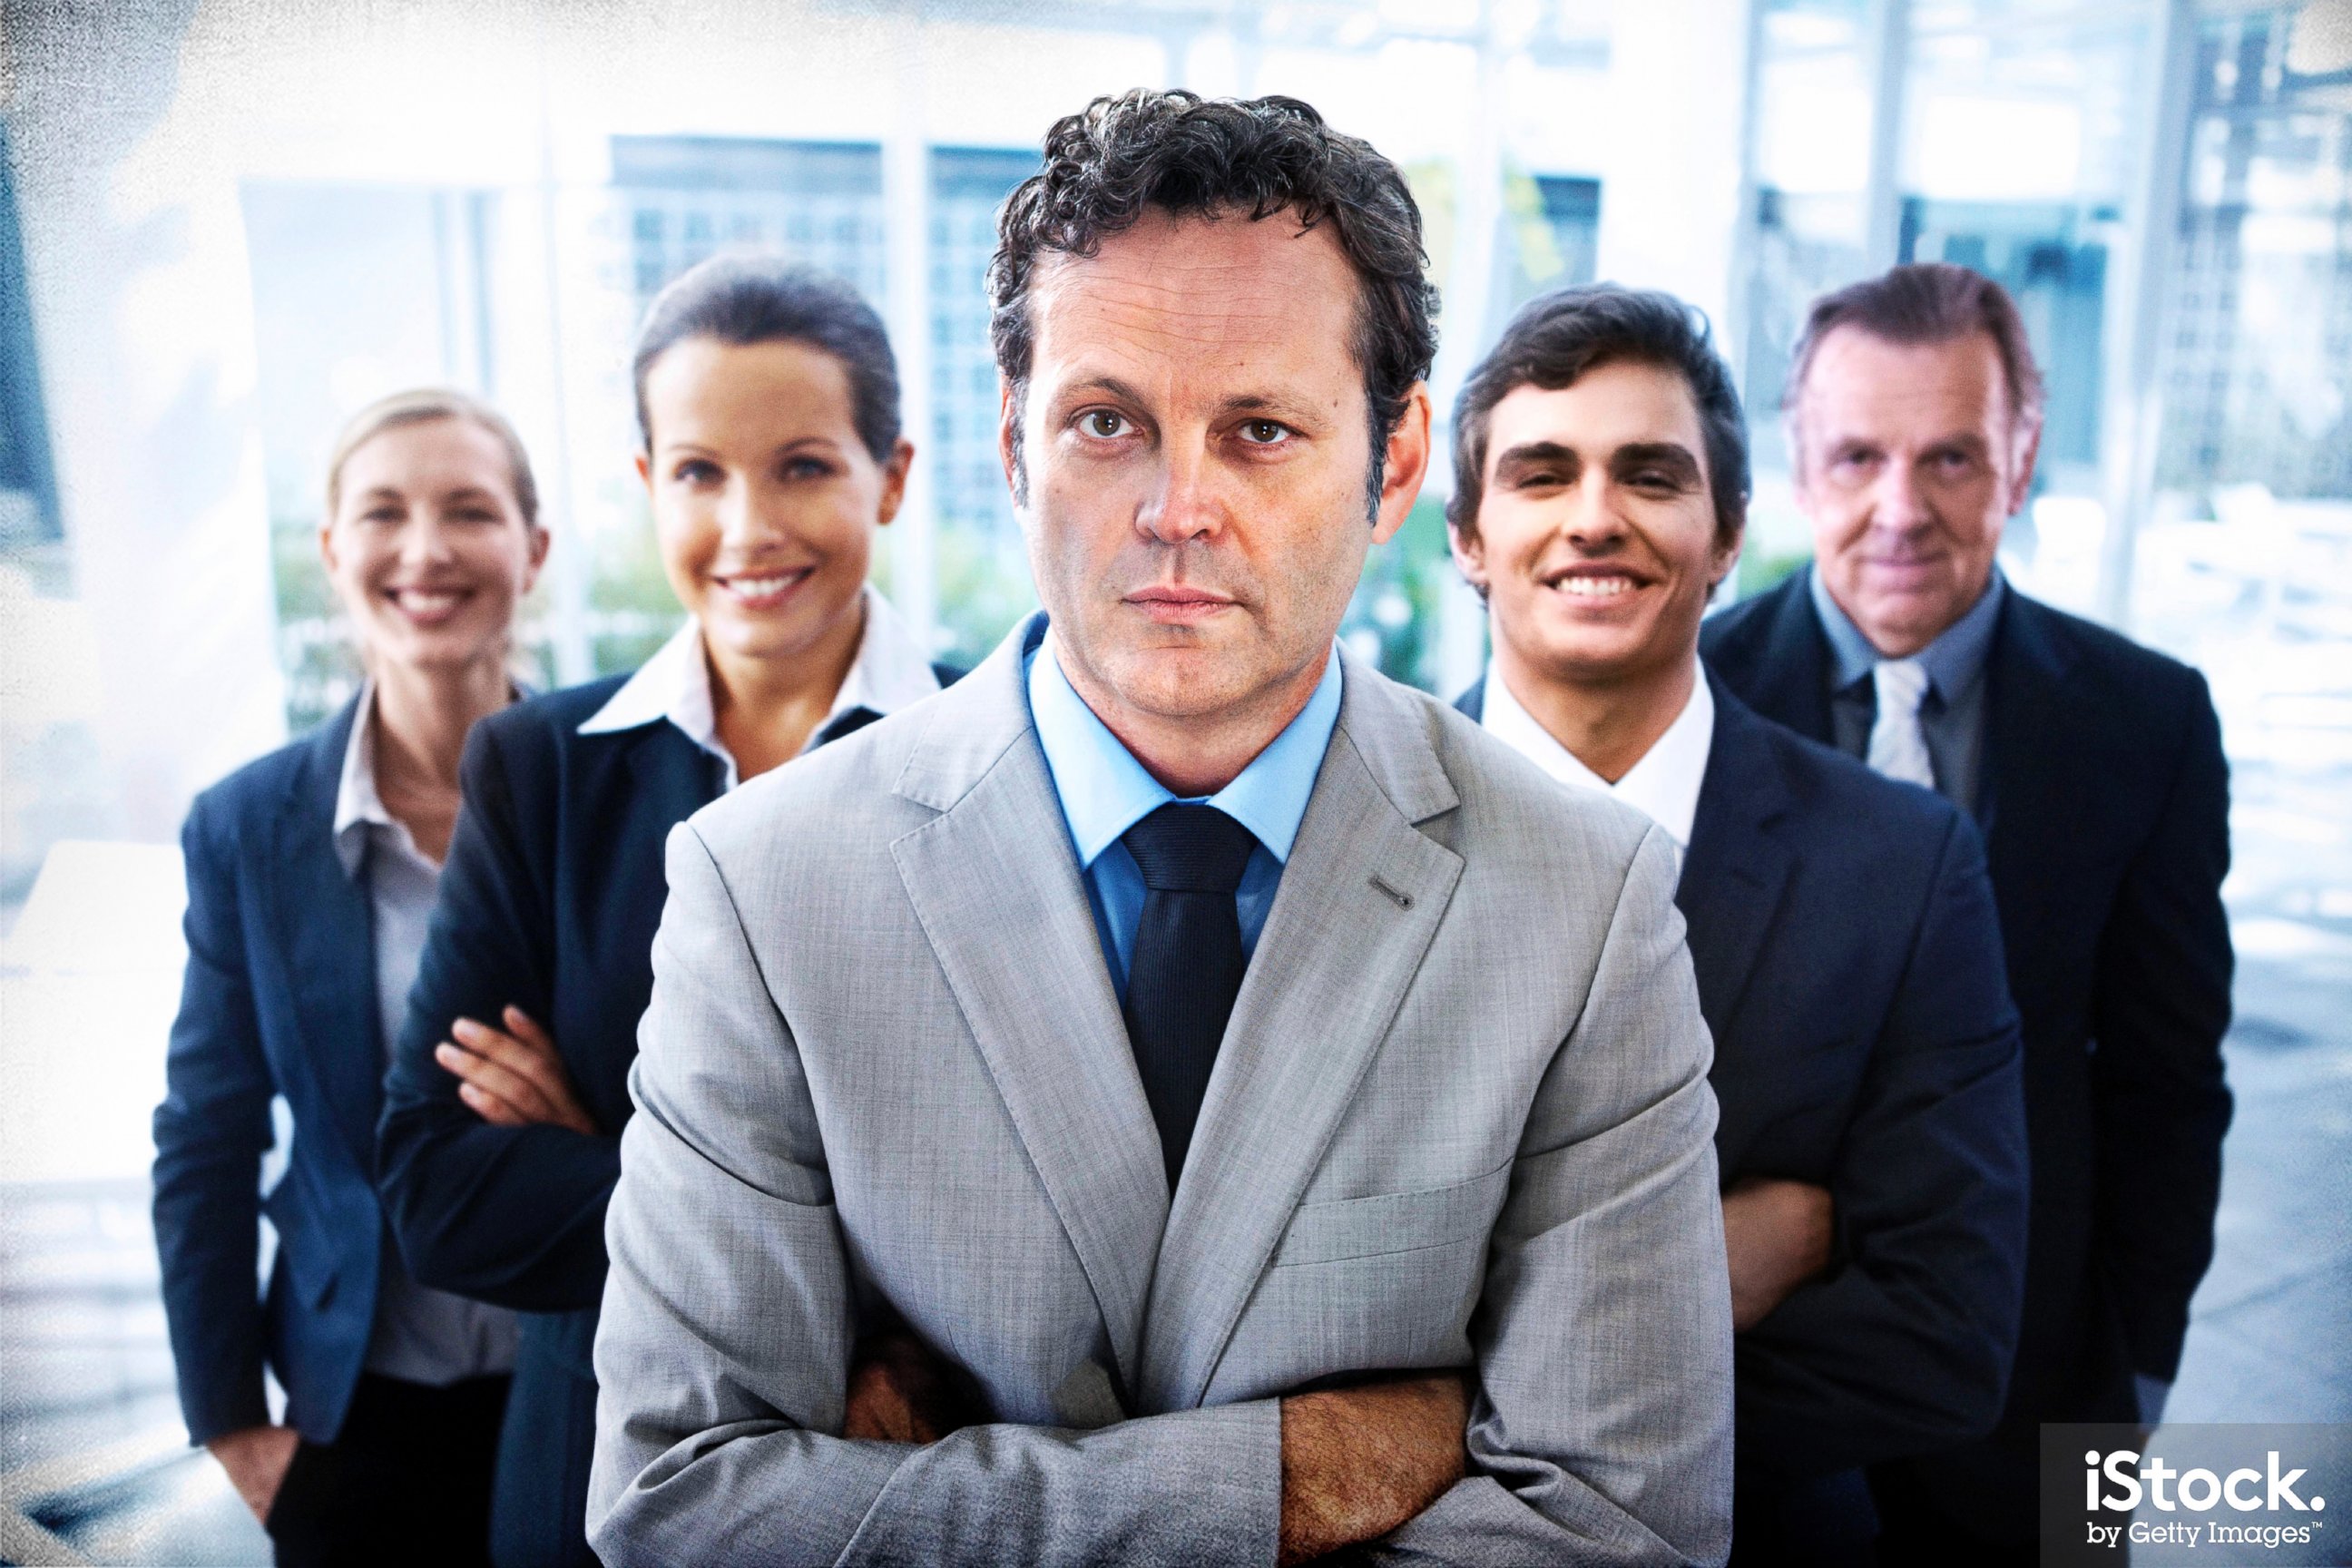 PHOTO: Vince Vaughn and Dave Franco pose for stock images for iStock.